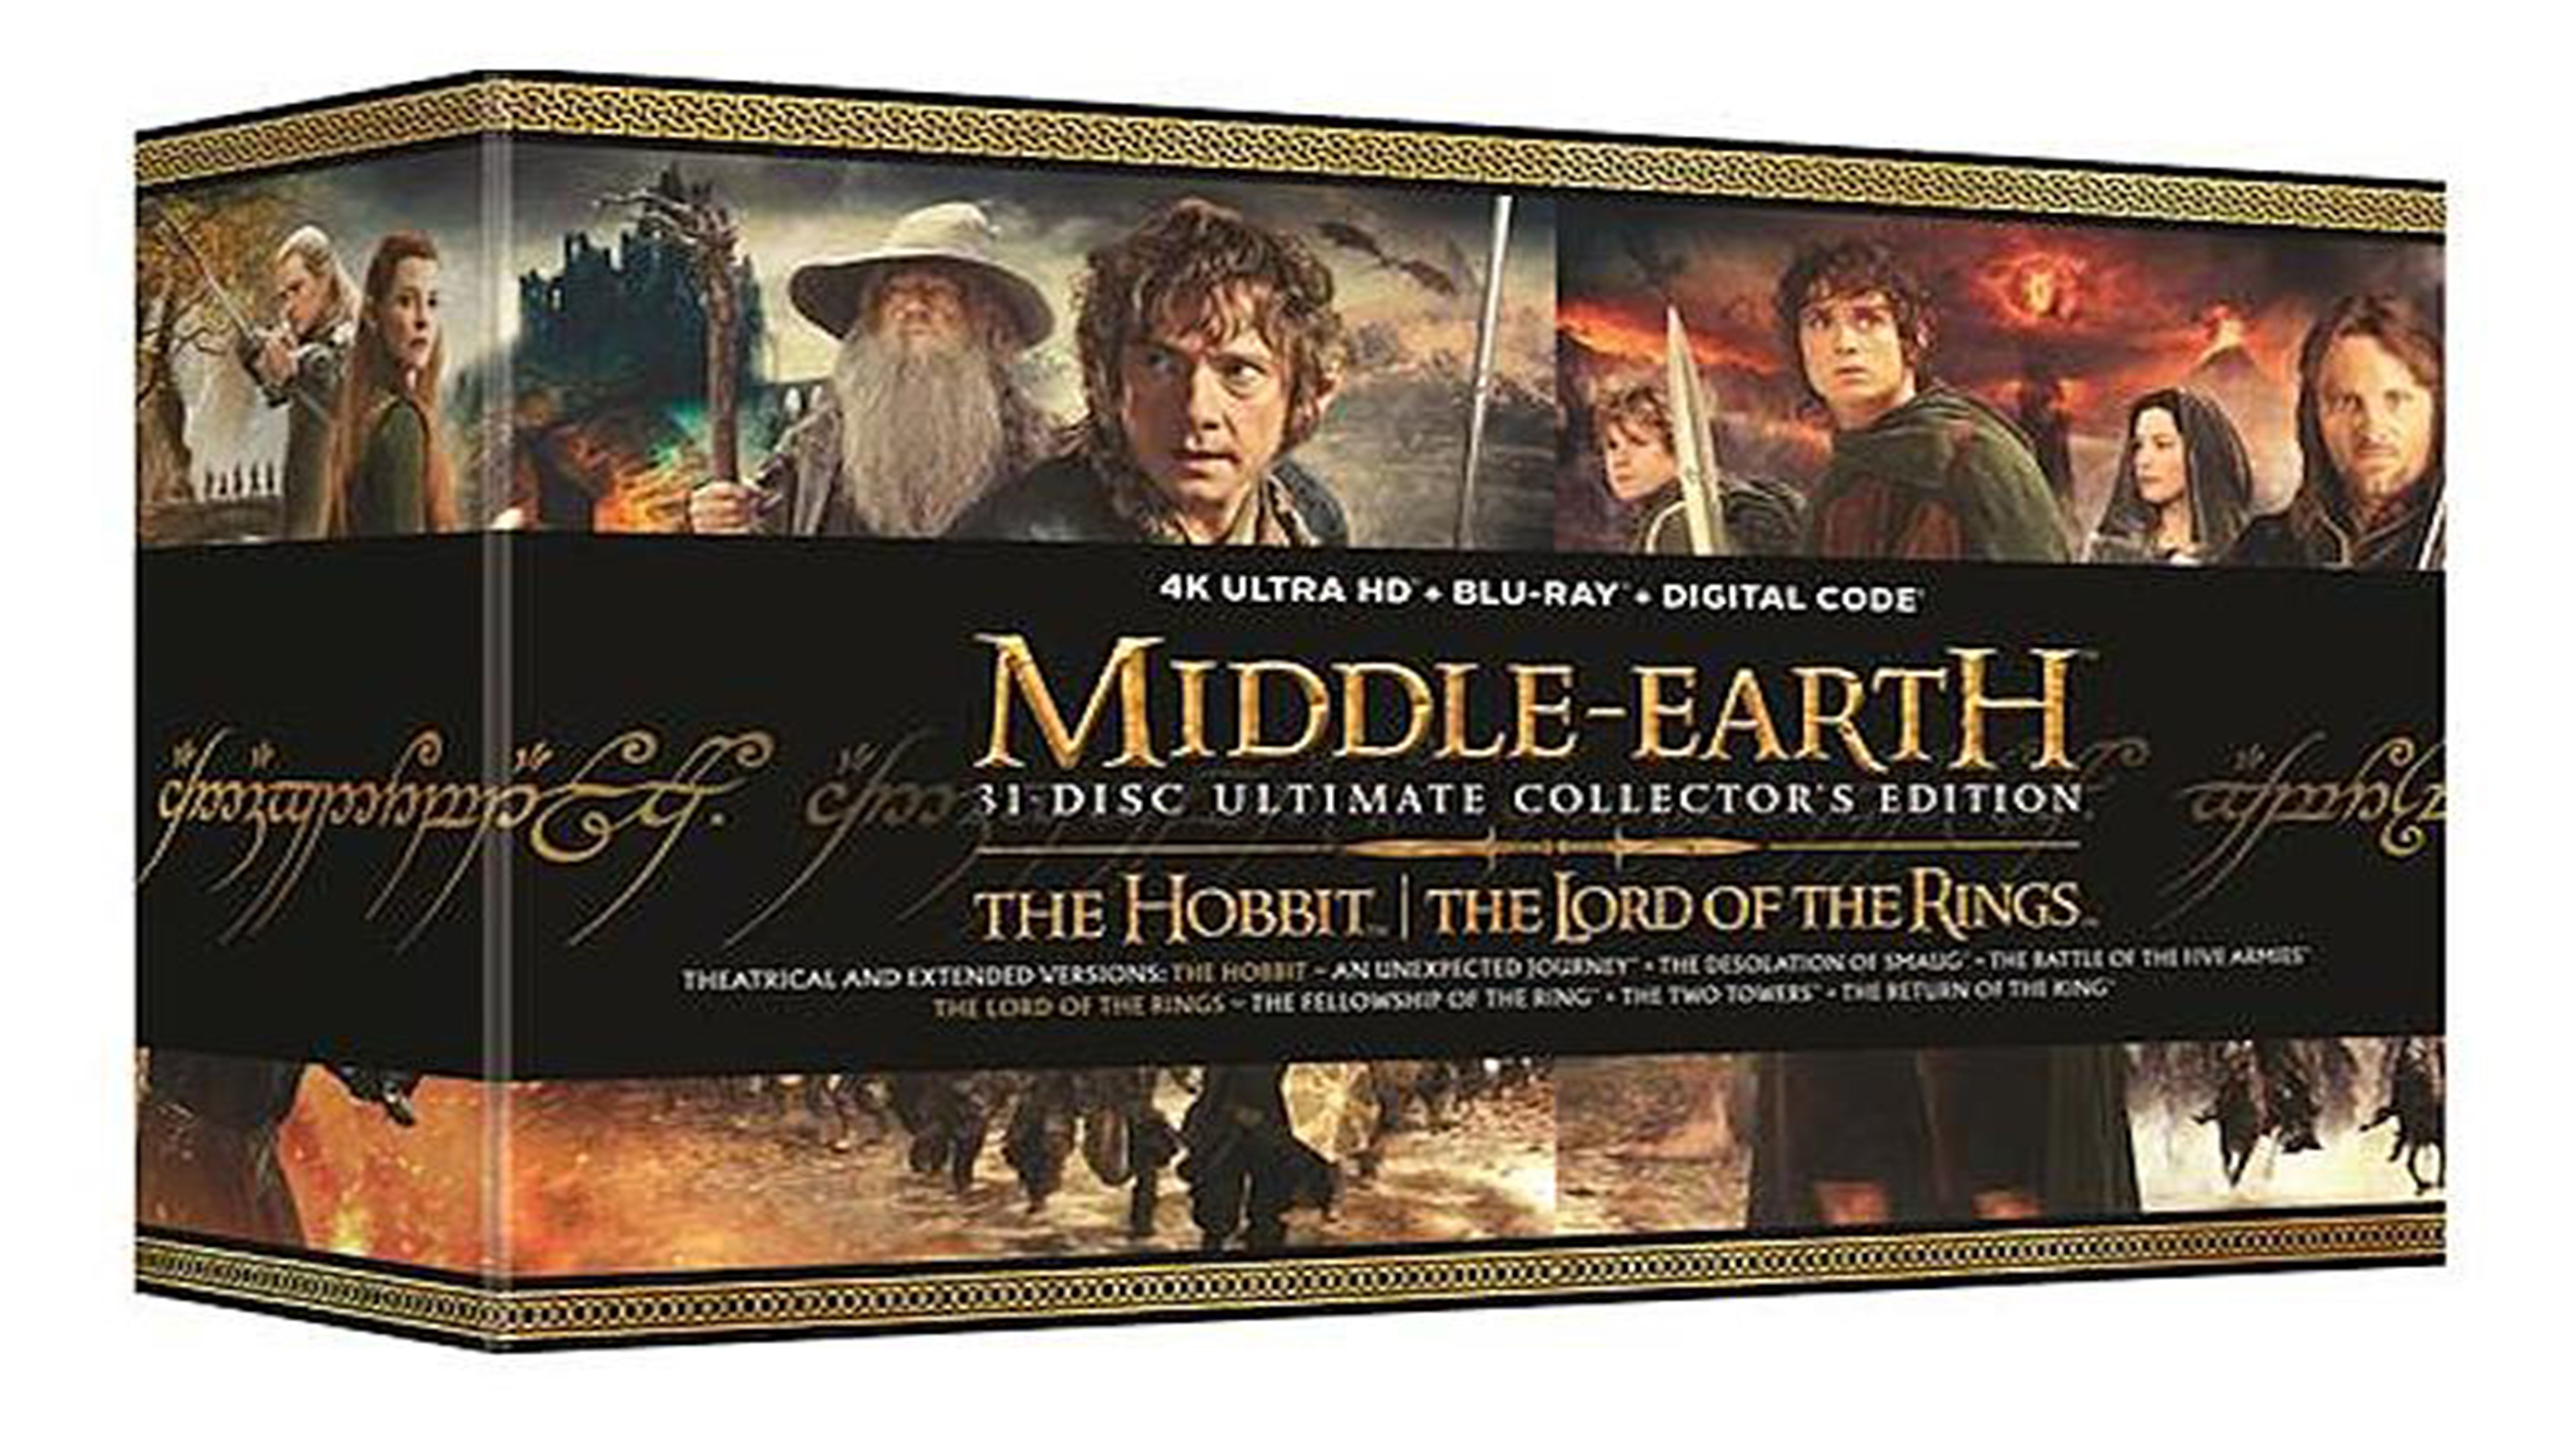 Warner Bros. to release ‘The Lord of the Rings' The Middle-Earth ultimate collector’s edition photo from Screen Crush